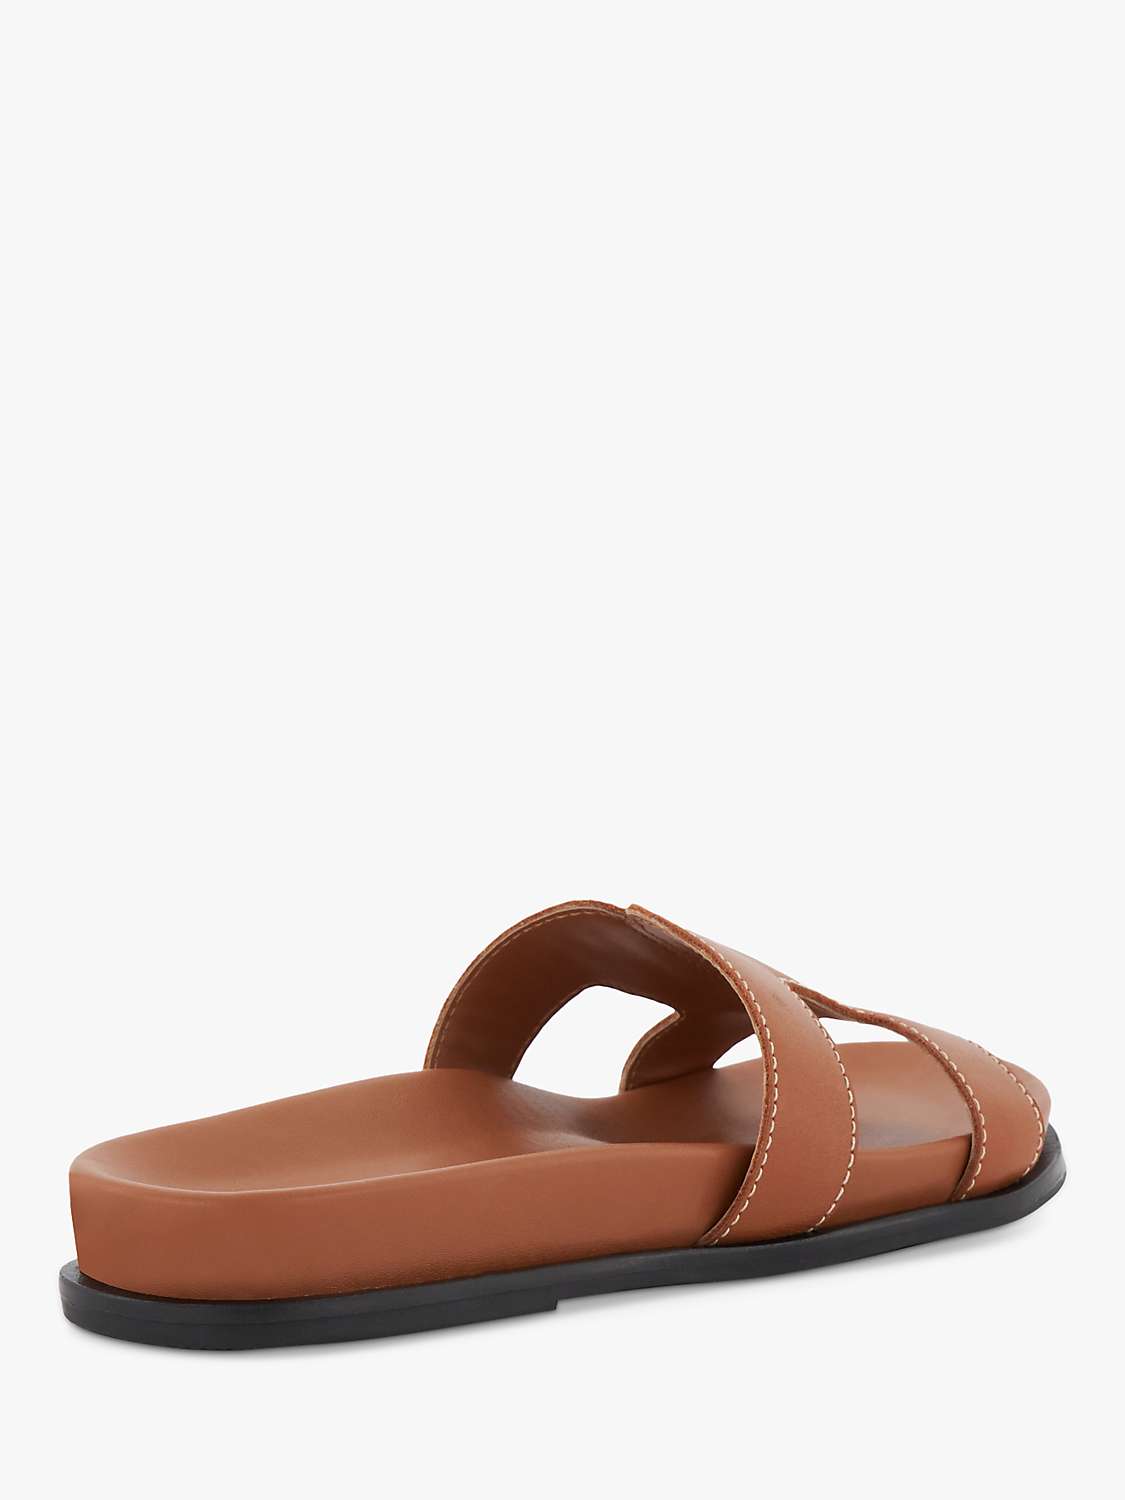 Buy Dune Wide Fit Loupa Leather Sandals, Tan Online at johnlewis.com